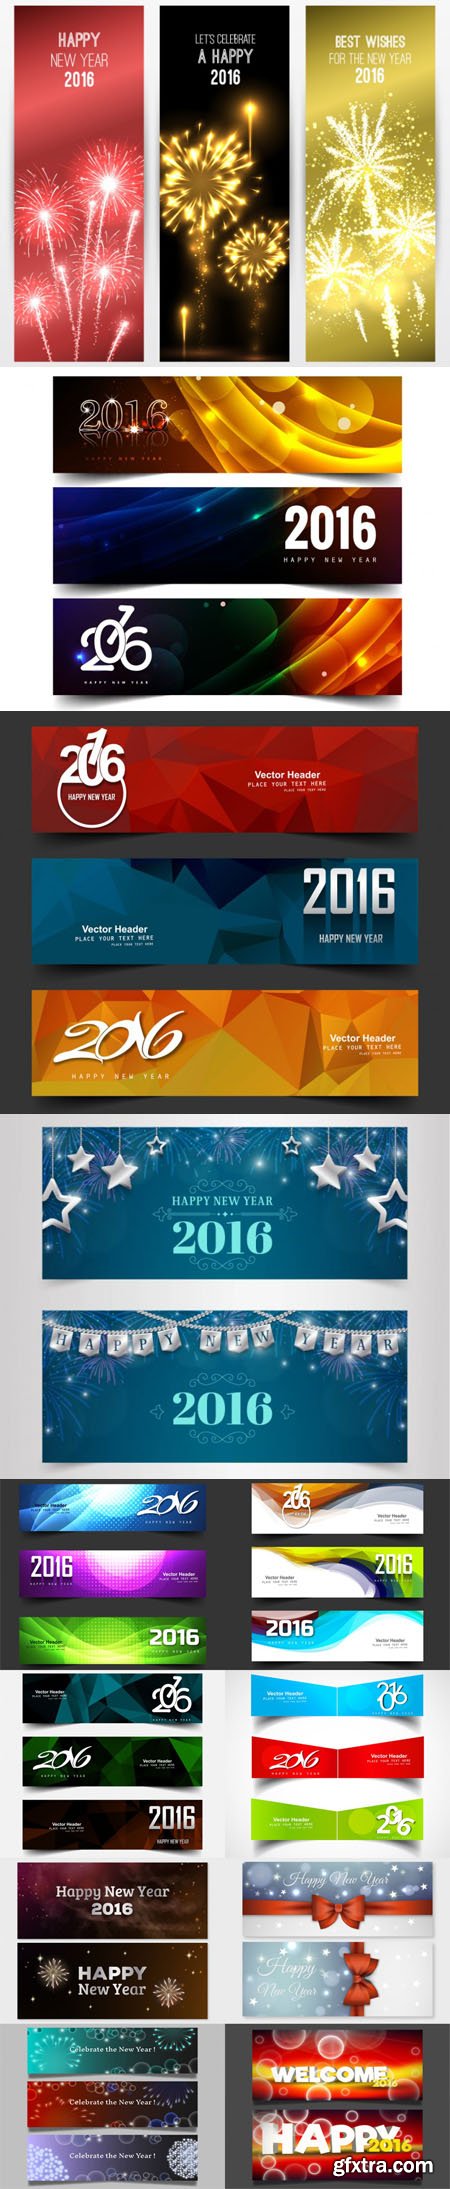 Happy New Year 2016 Banners in Vector [Vol.2]